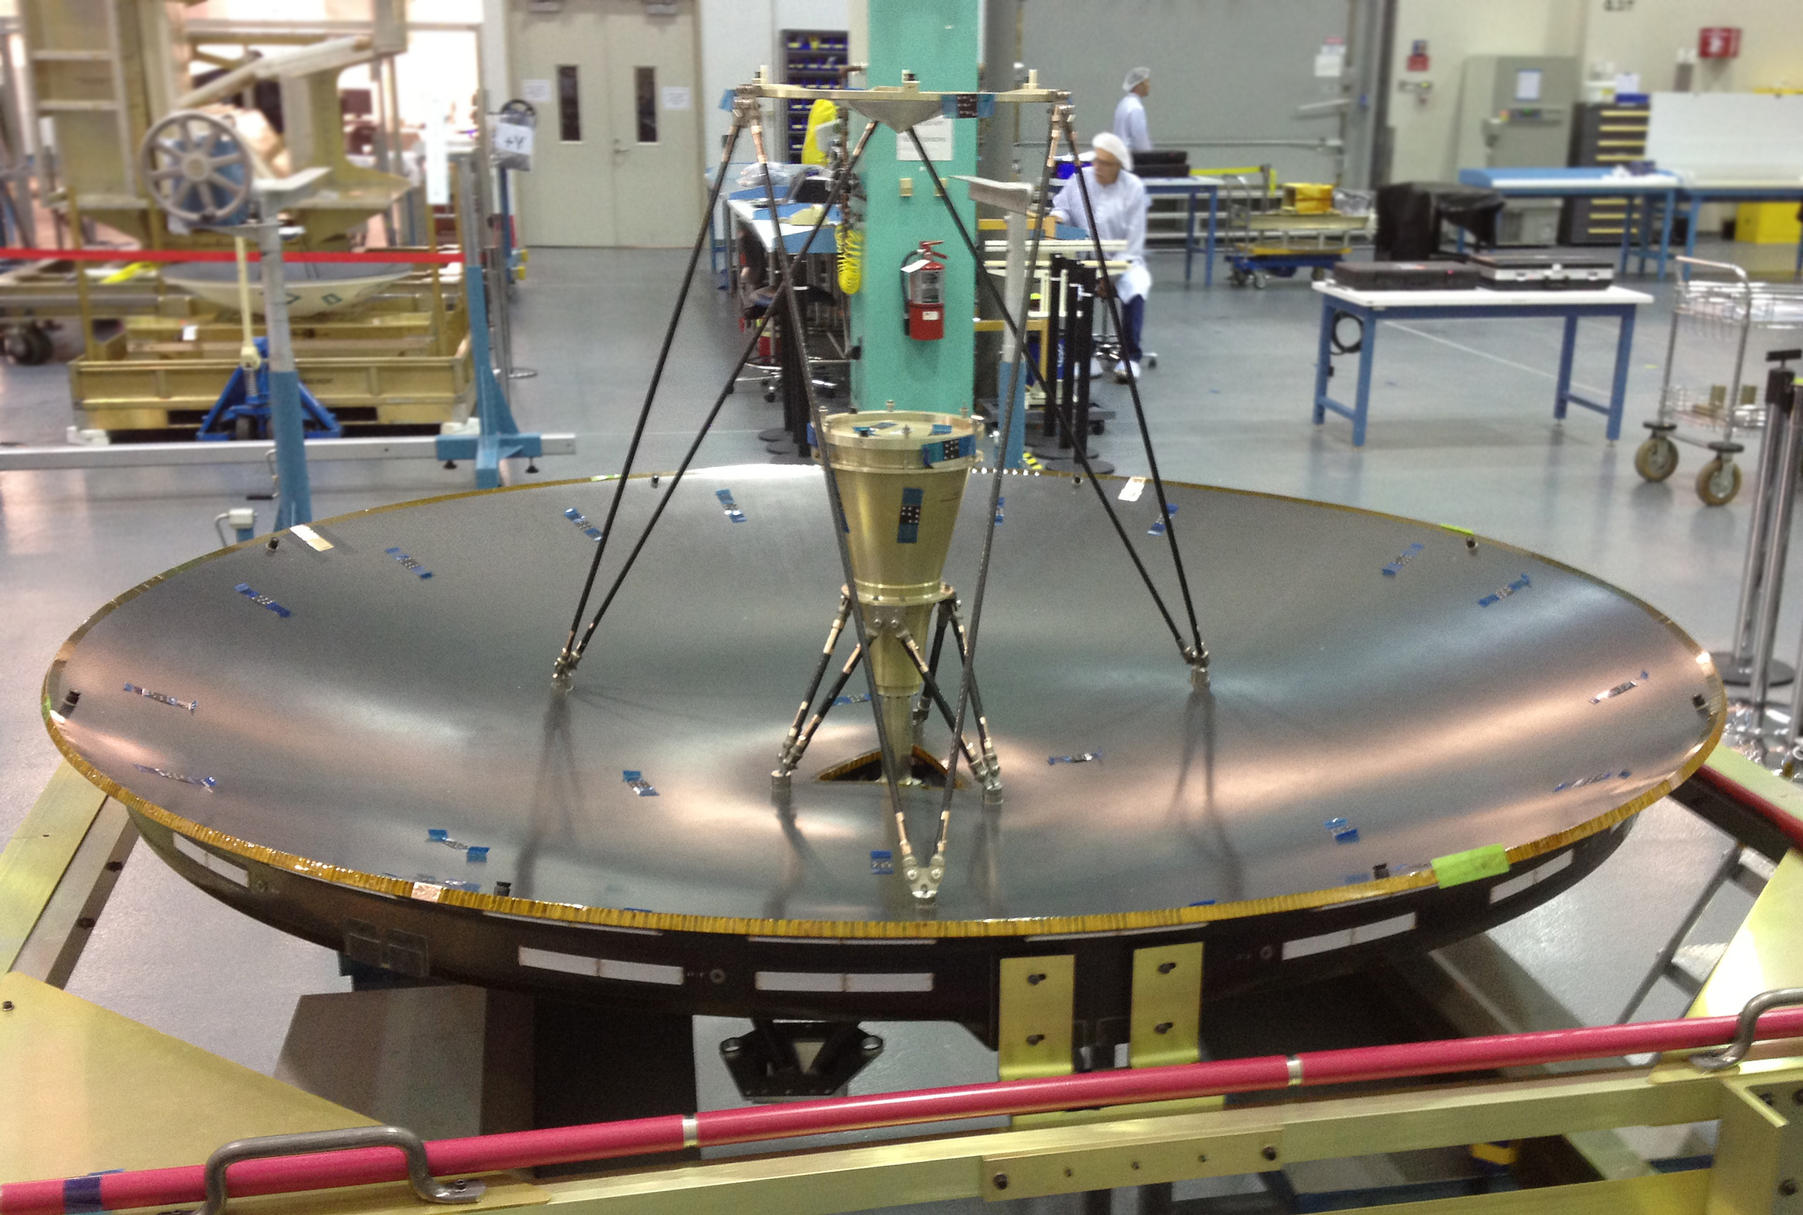 The MAVEN high-gain antenna measures 6.5 feet (79 inches) in diameter by 3.3 feet (40 inches) tall. The reflector is made of Kevlar honeycomb core sandwiched between two composite face sheets. It is currently undergoing performance, pattern, and acoustic testing at Lockheed Martin's facility in Newtown, Pa.